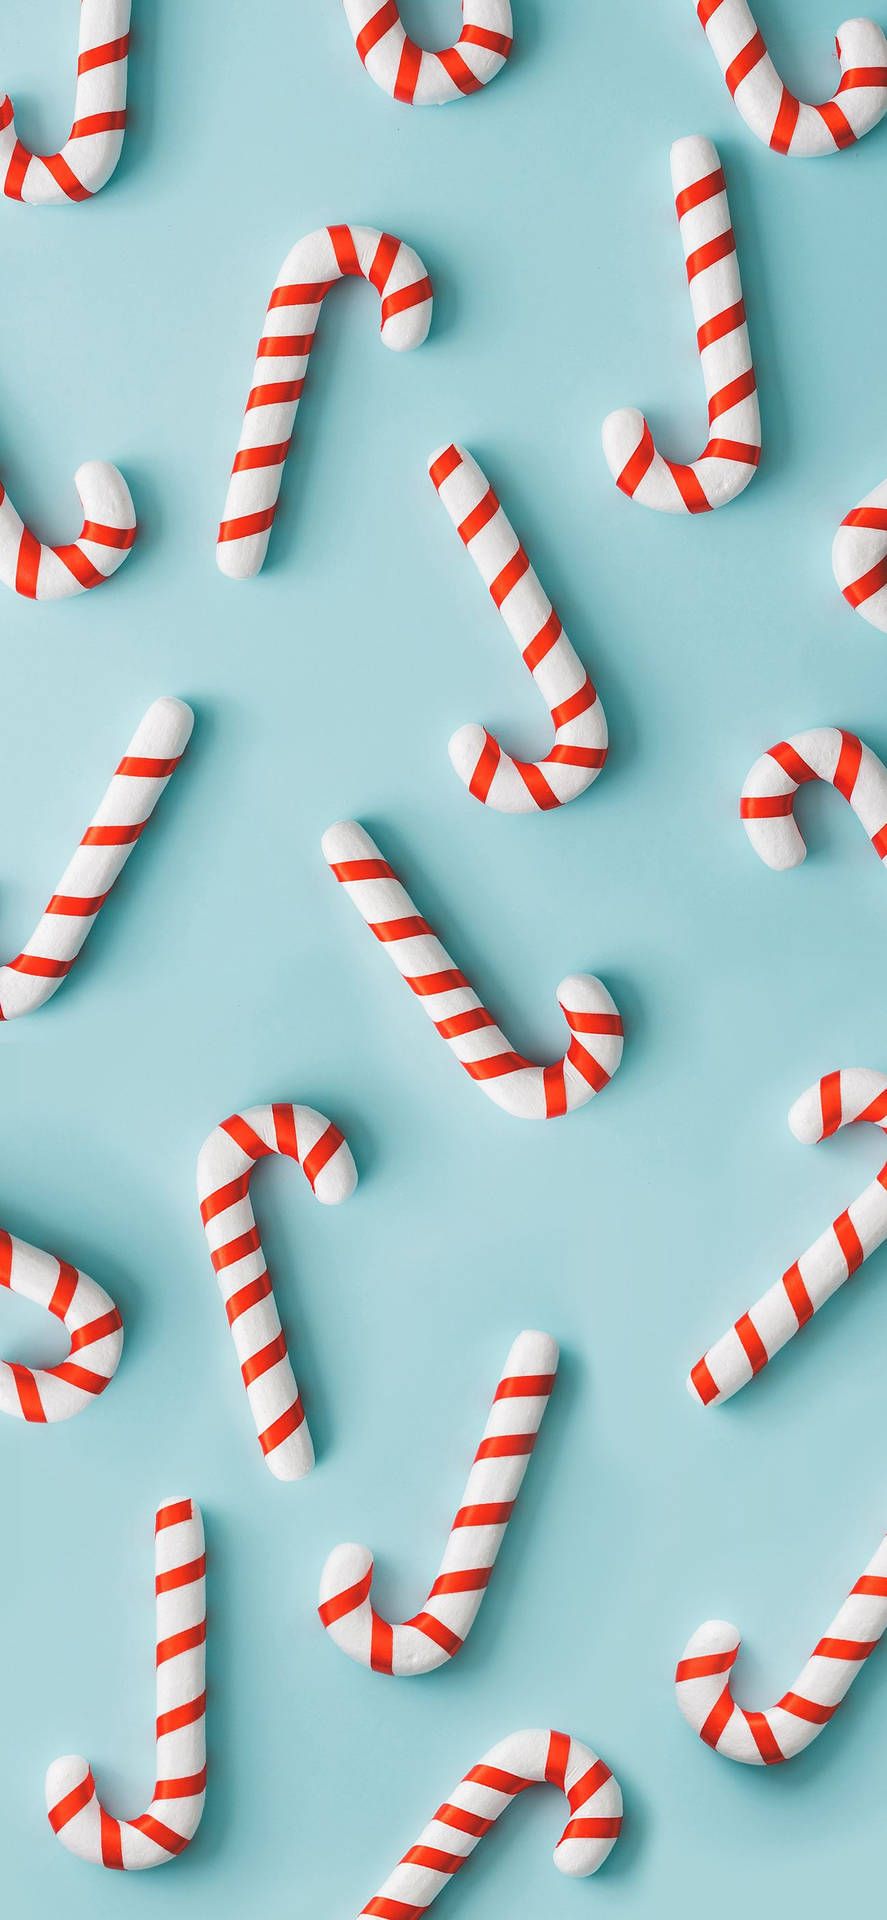 Download Candy Cane Pastel Shade Wallpaper